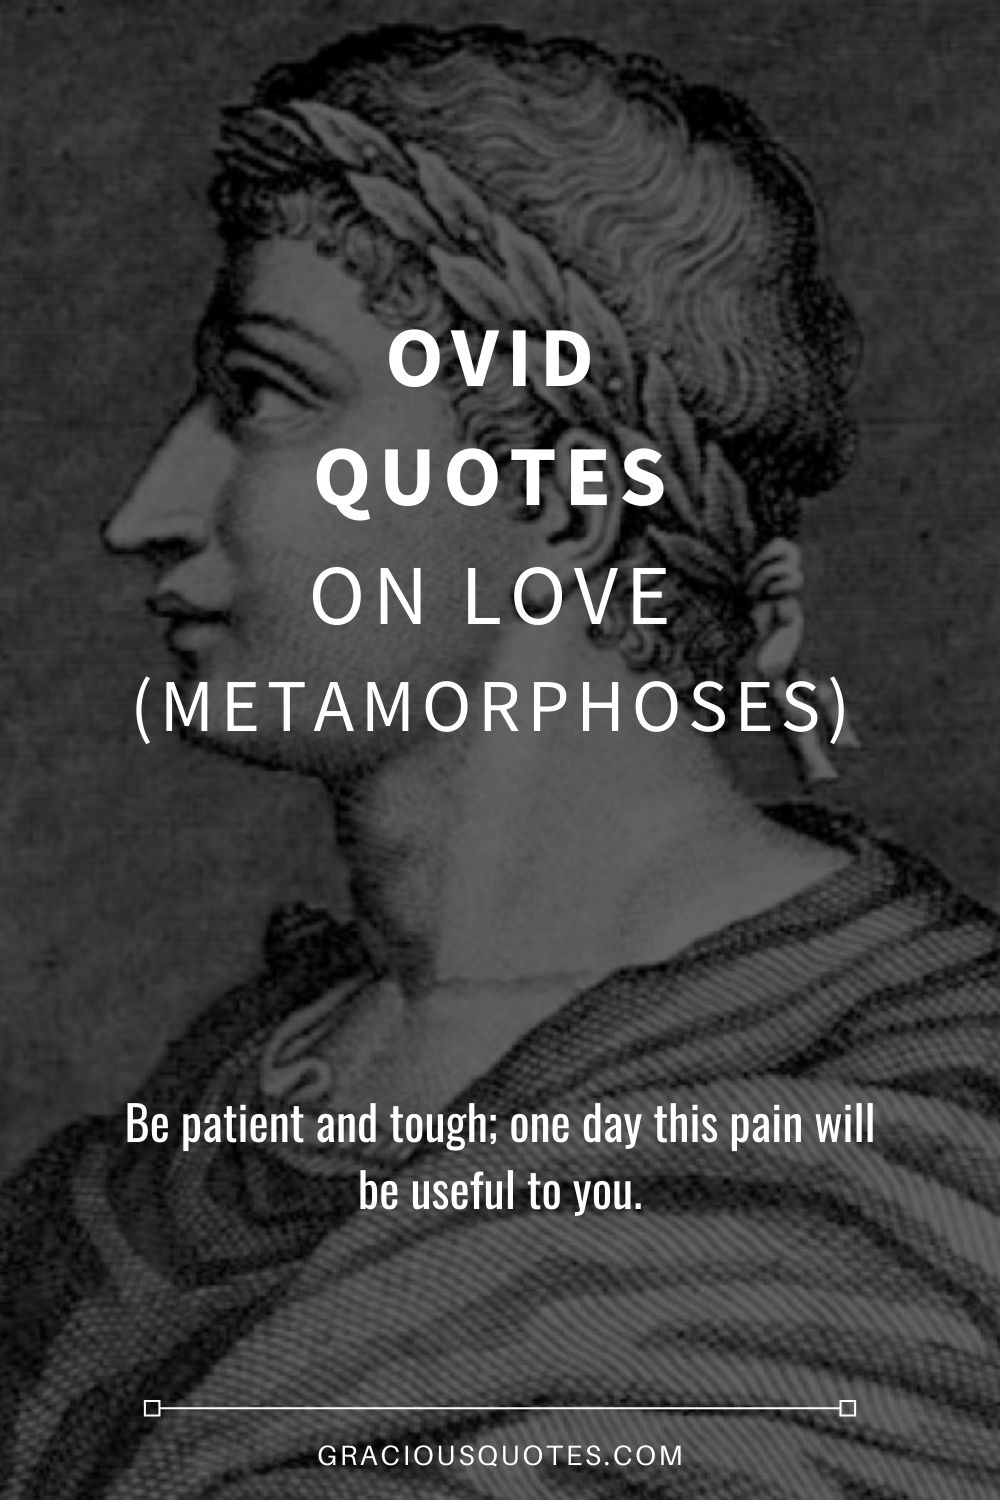 Ovid Quotes on Love (METAMORPHOSES) - Gracious Quotes